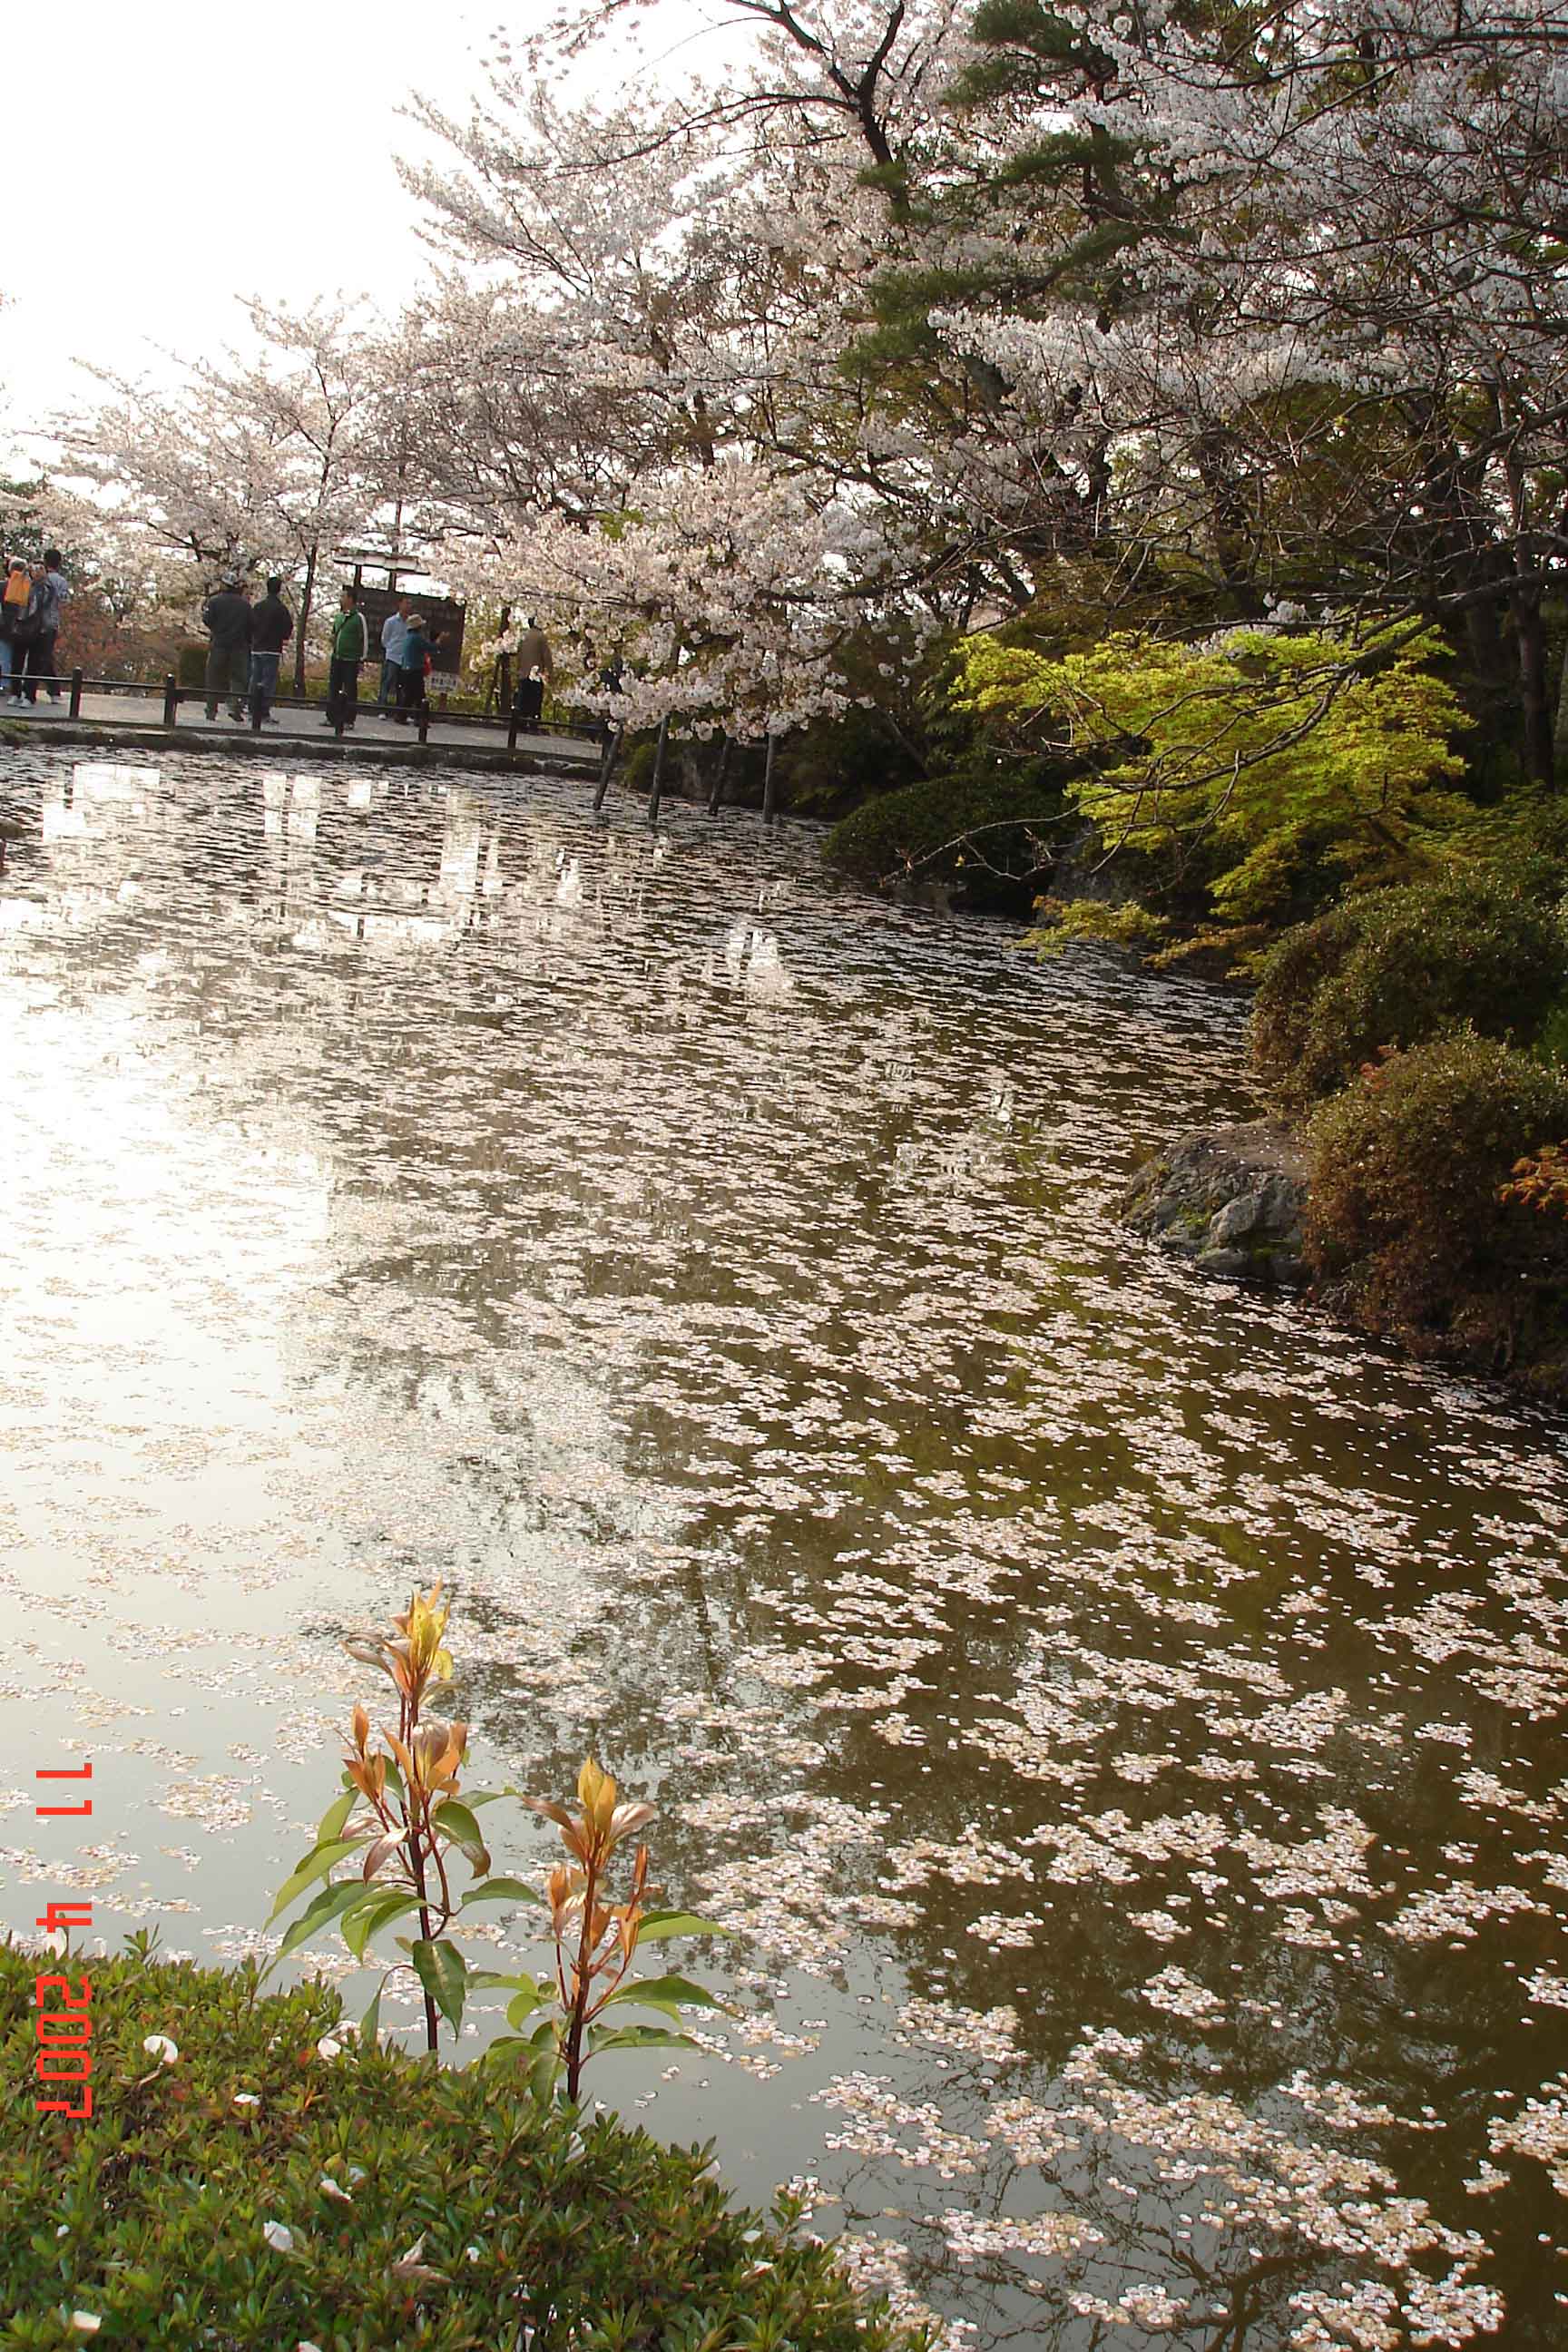 Kiyhomizu-Pond covered in pink petals and reflections, beautiful. 